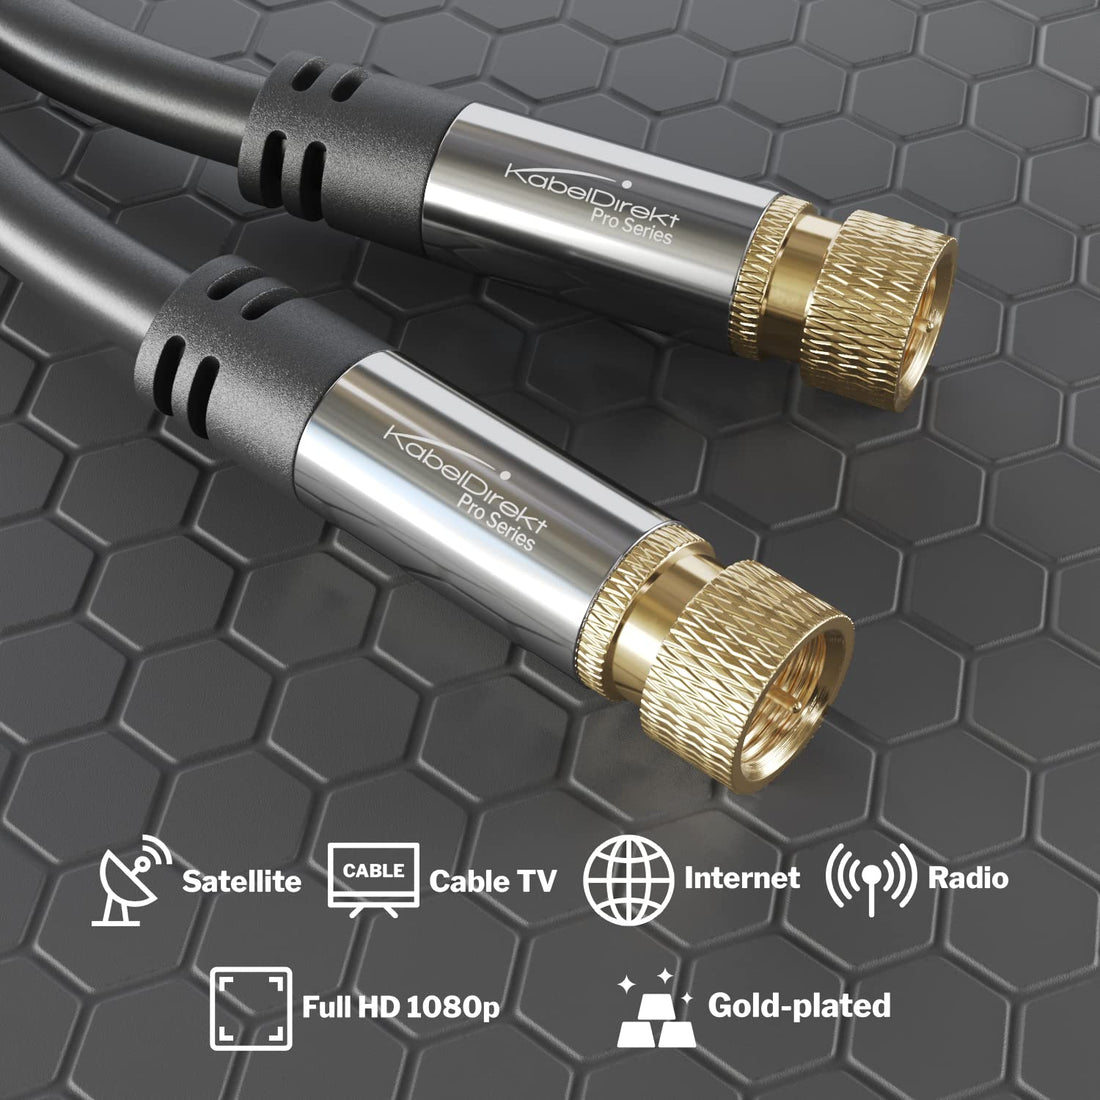 KabelDirekt Digital Coaxial Audio Video Cable (20ft) Satellite Cable Connectors - Coax Male F Connector Pin - Coax Cables for Satellite Television - PRO Series